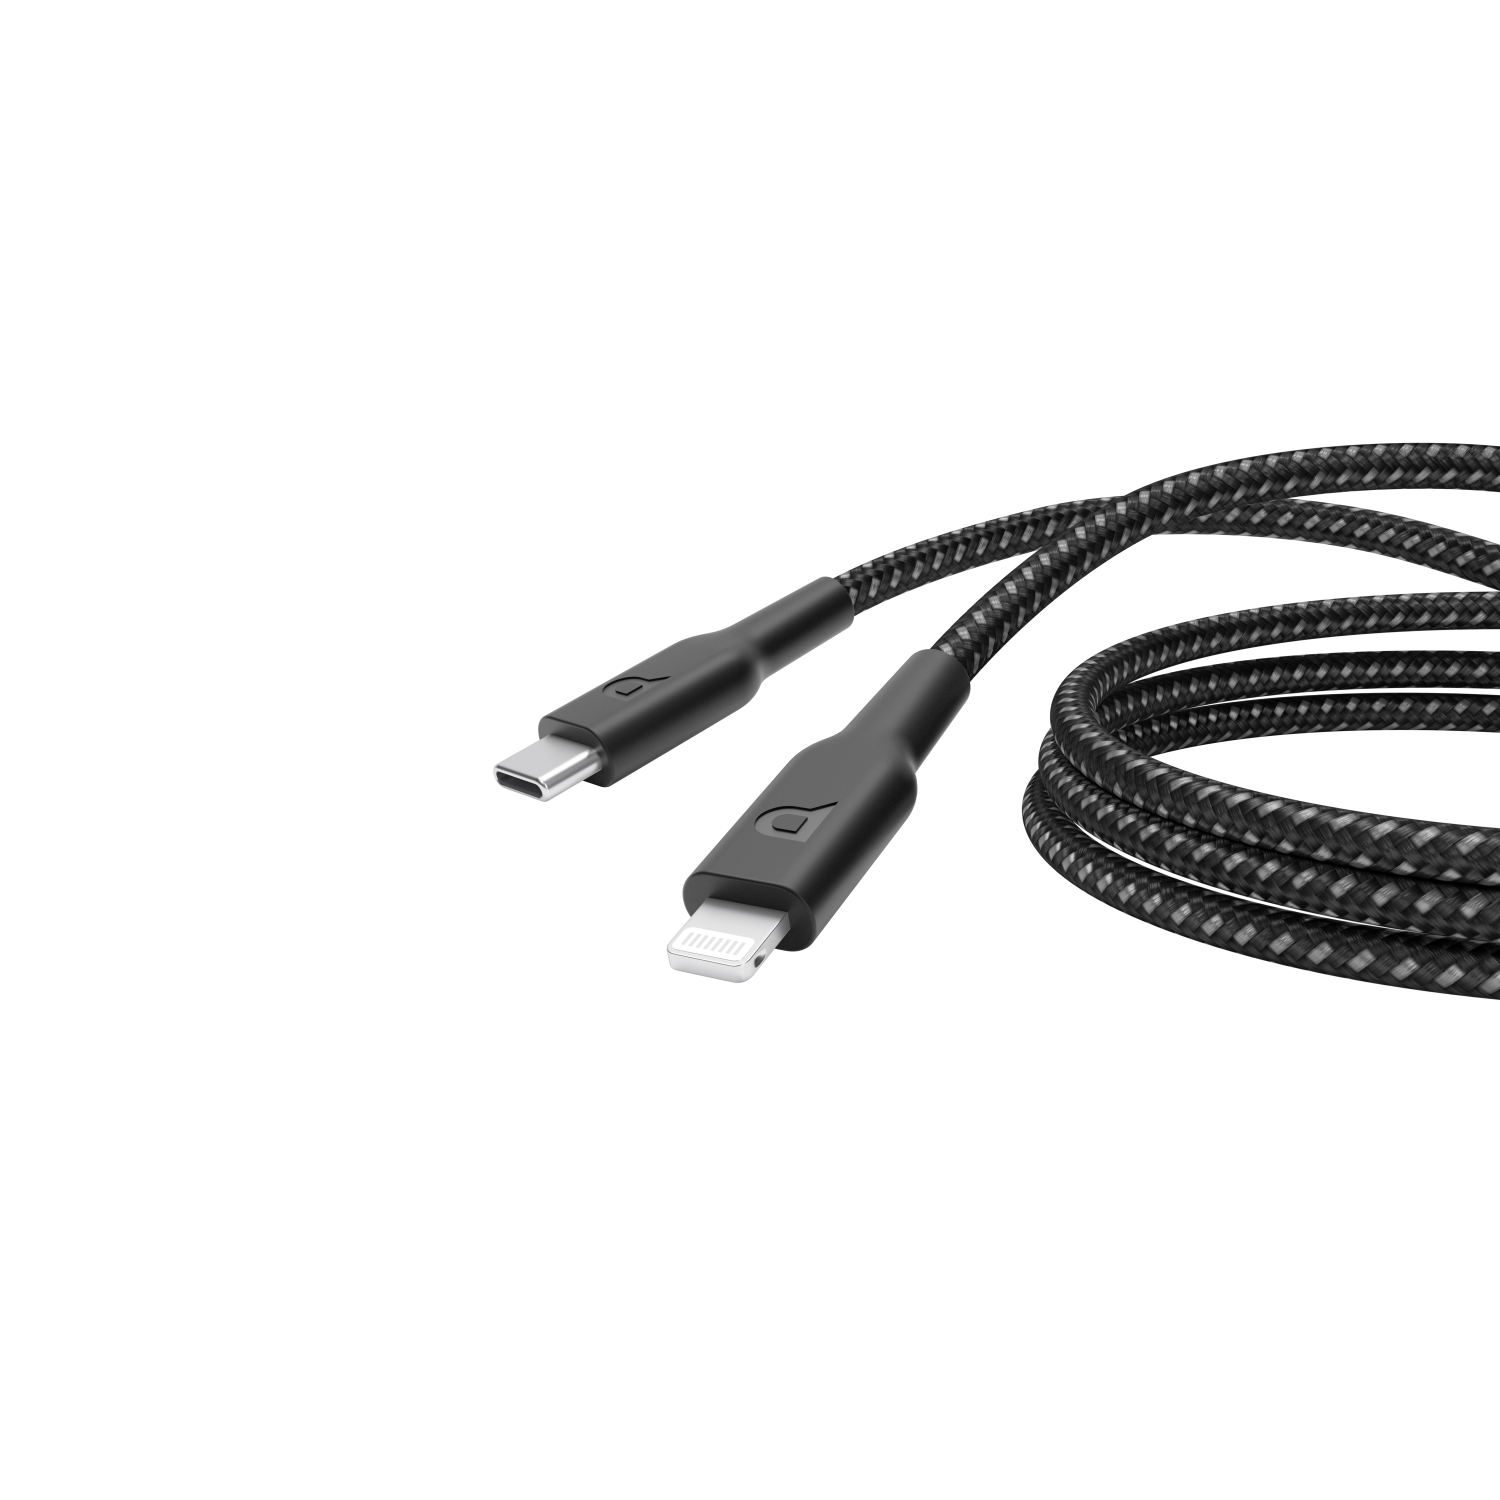 Lightning to USB Type-C 2 Meter Cable with Power Delivery